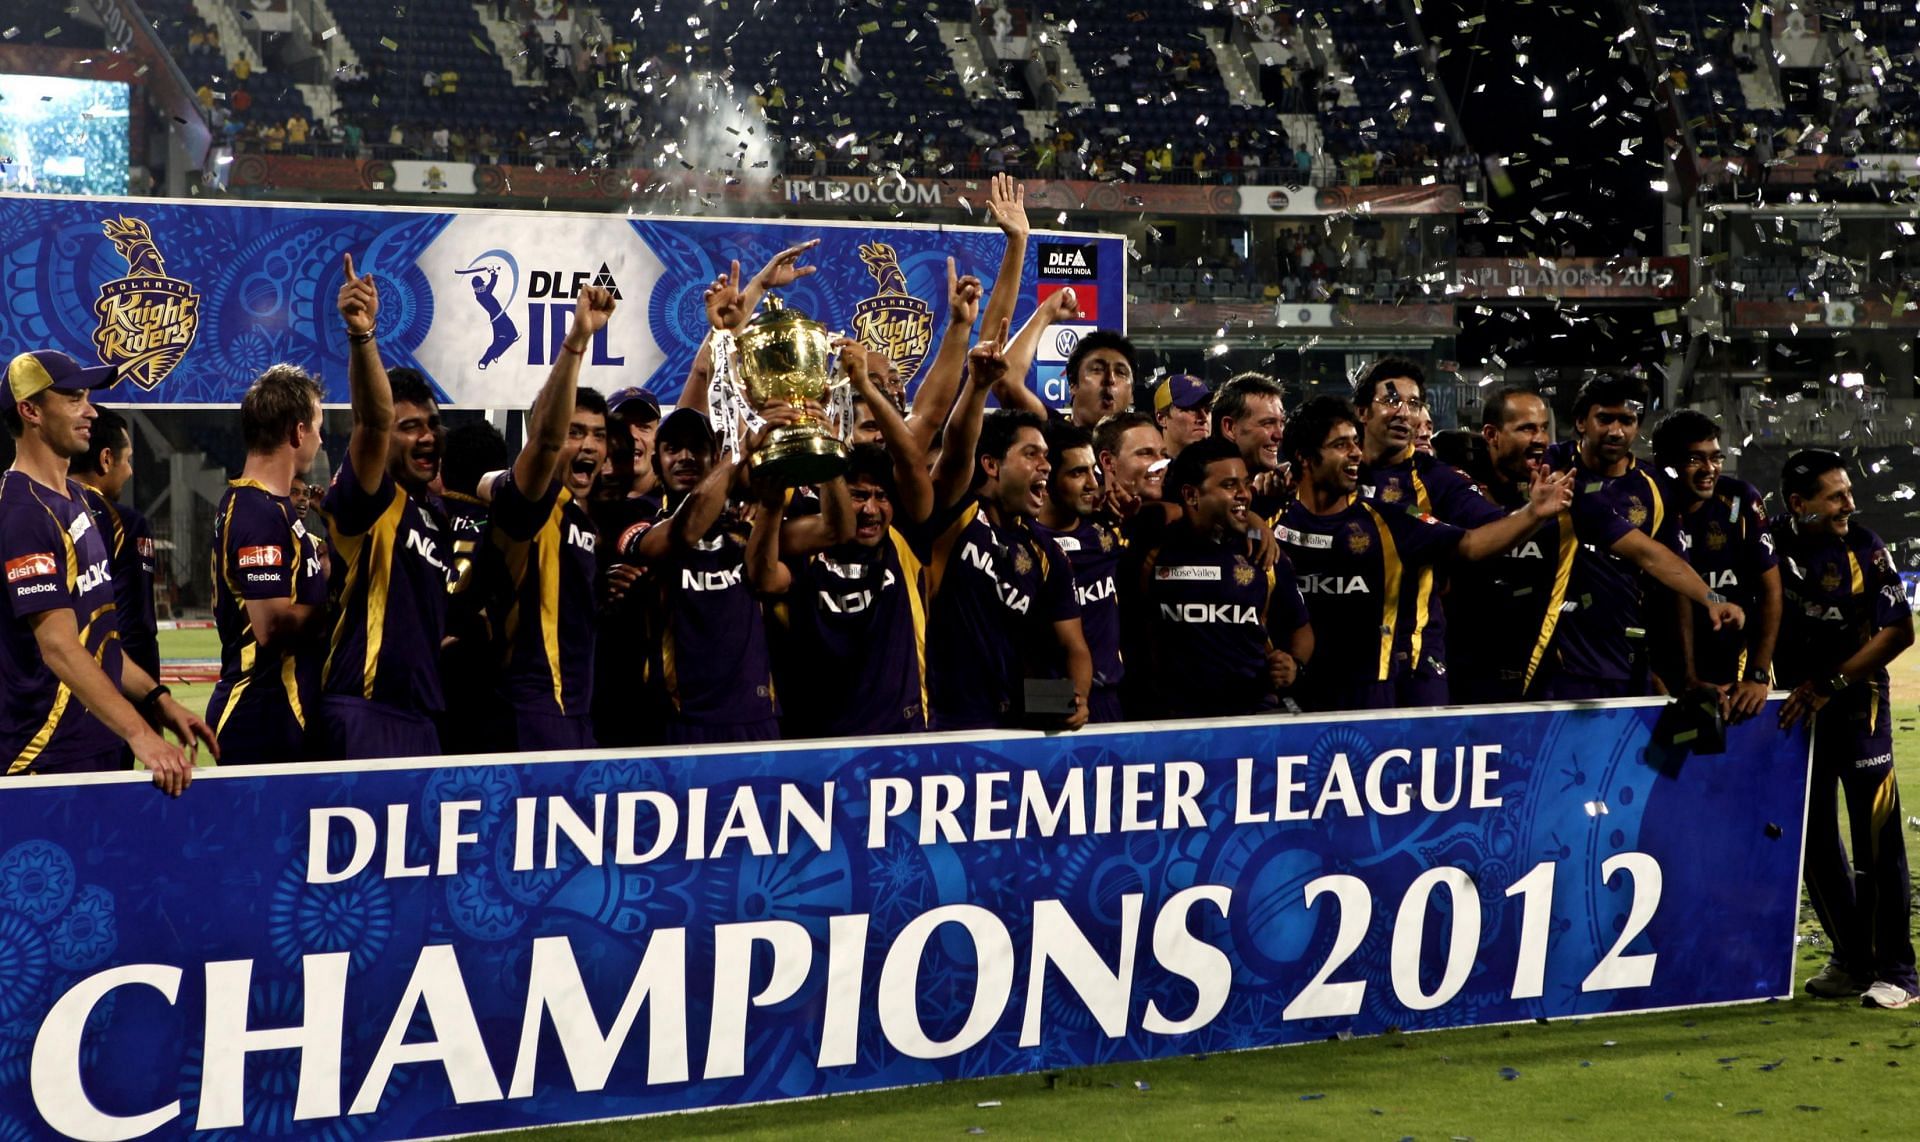 KKR last beat CSK at the Chepauk in the finals of IPL 2012